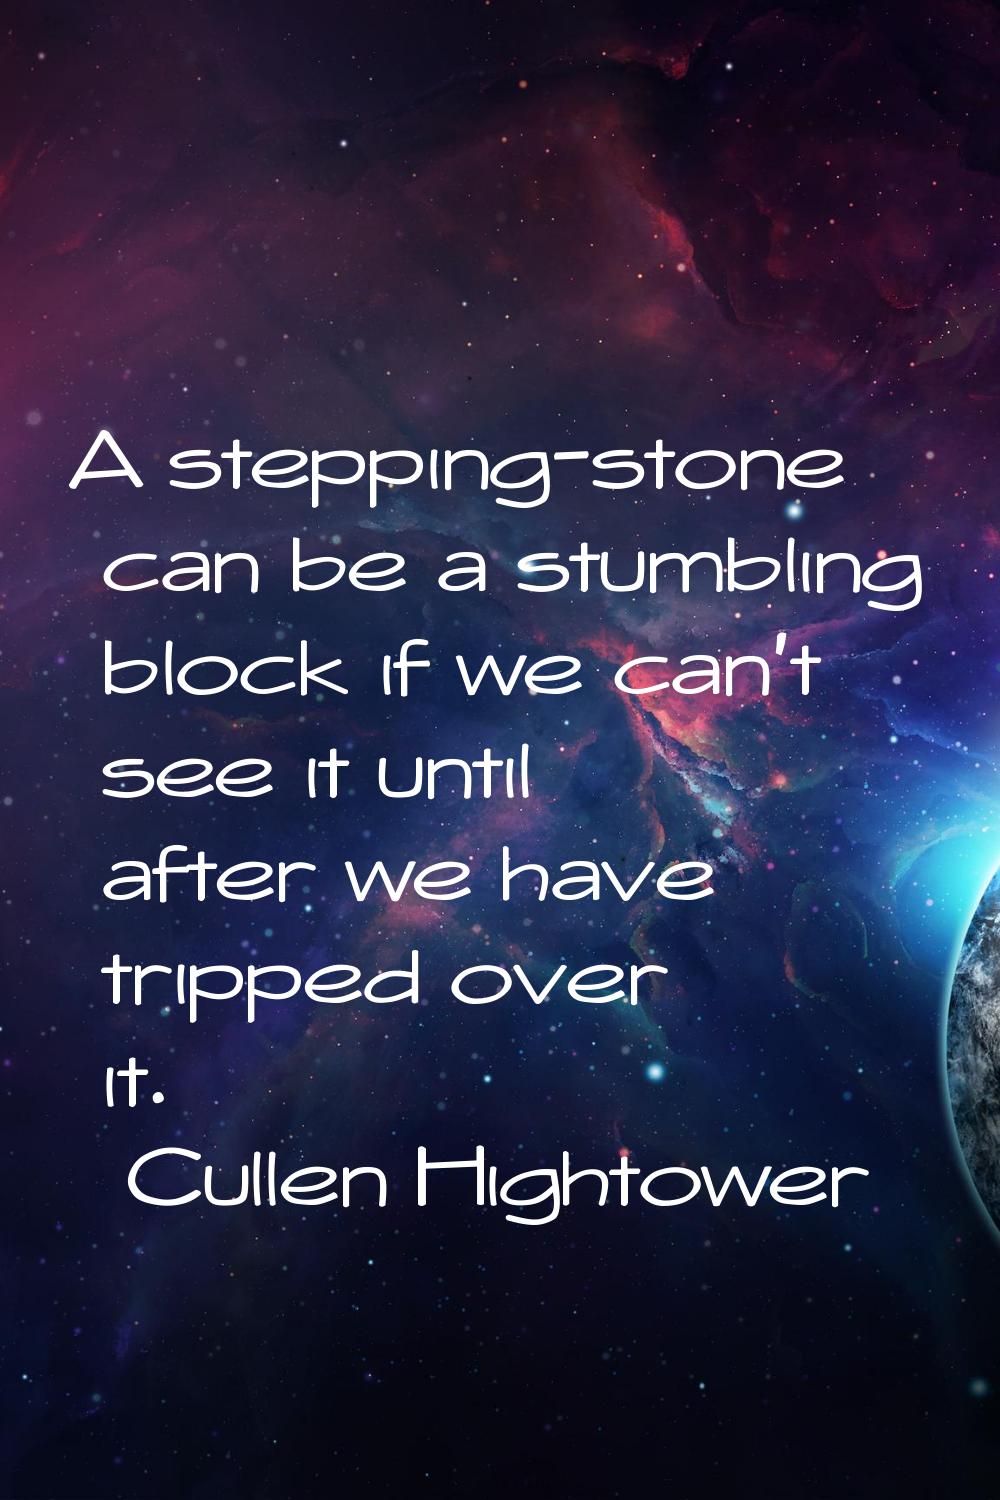 A stepping-stone can be a stumbling block if we can't see it until after we have tripped over it.